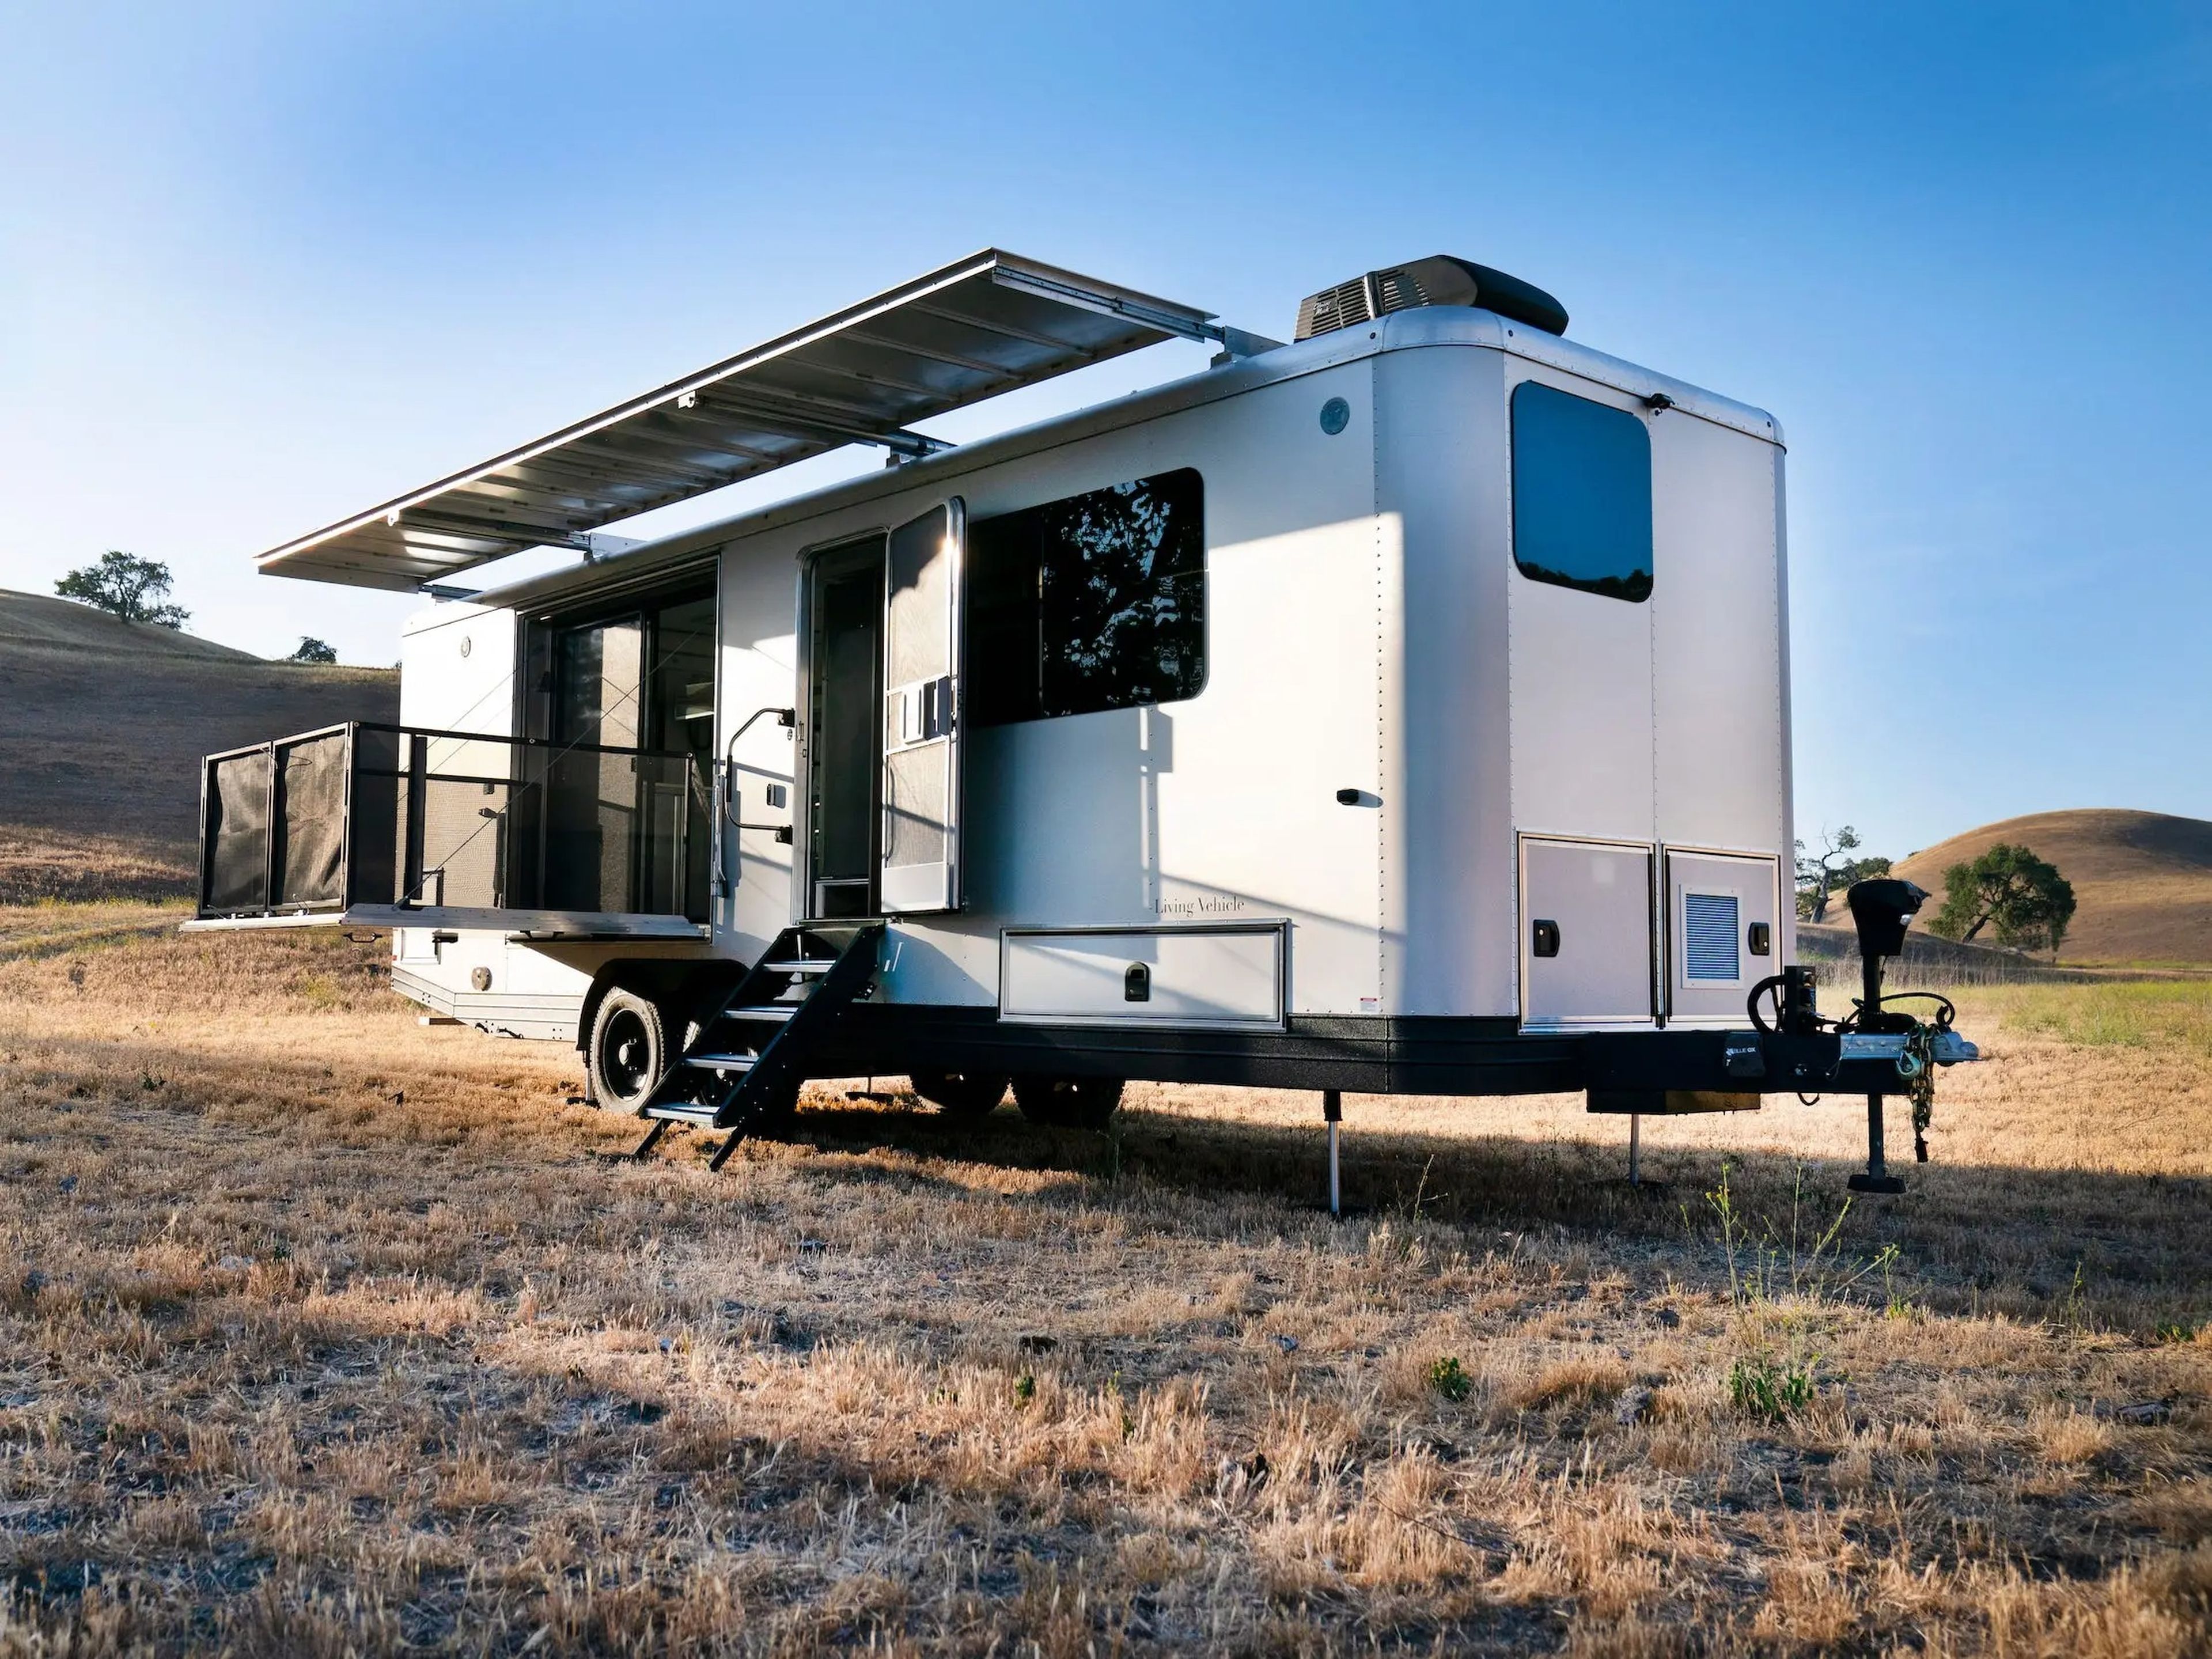 The exterior of the travel trailer as it sits on a brown field.